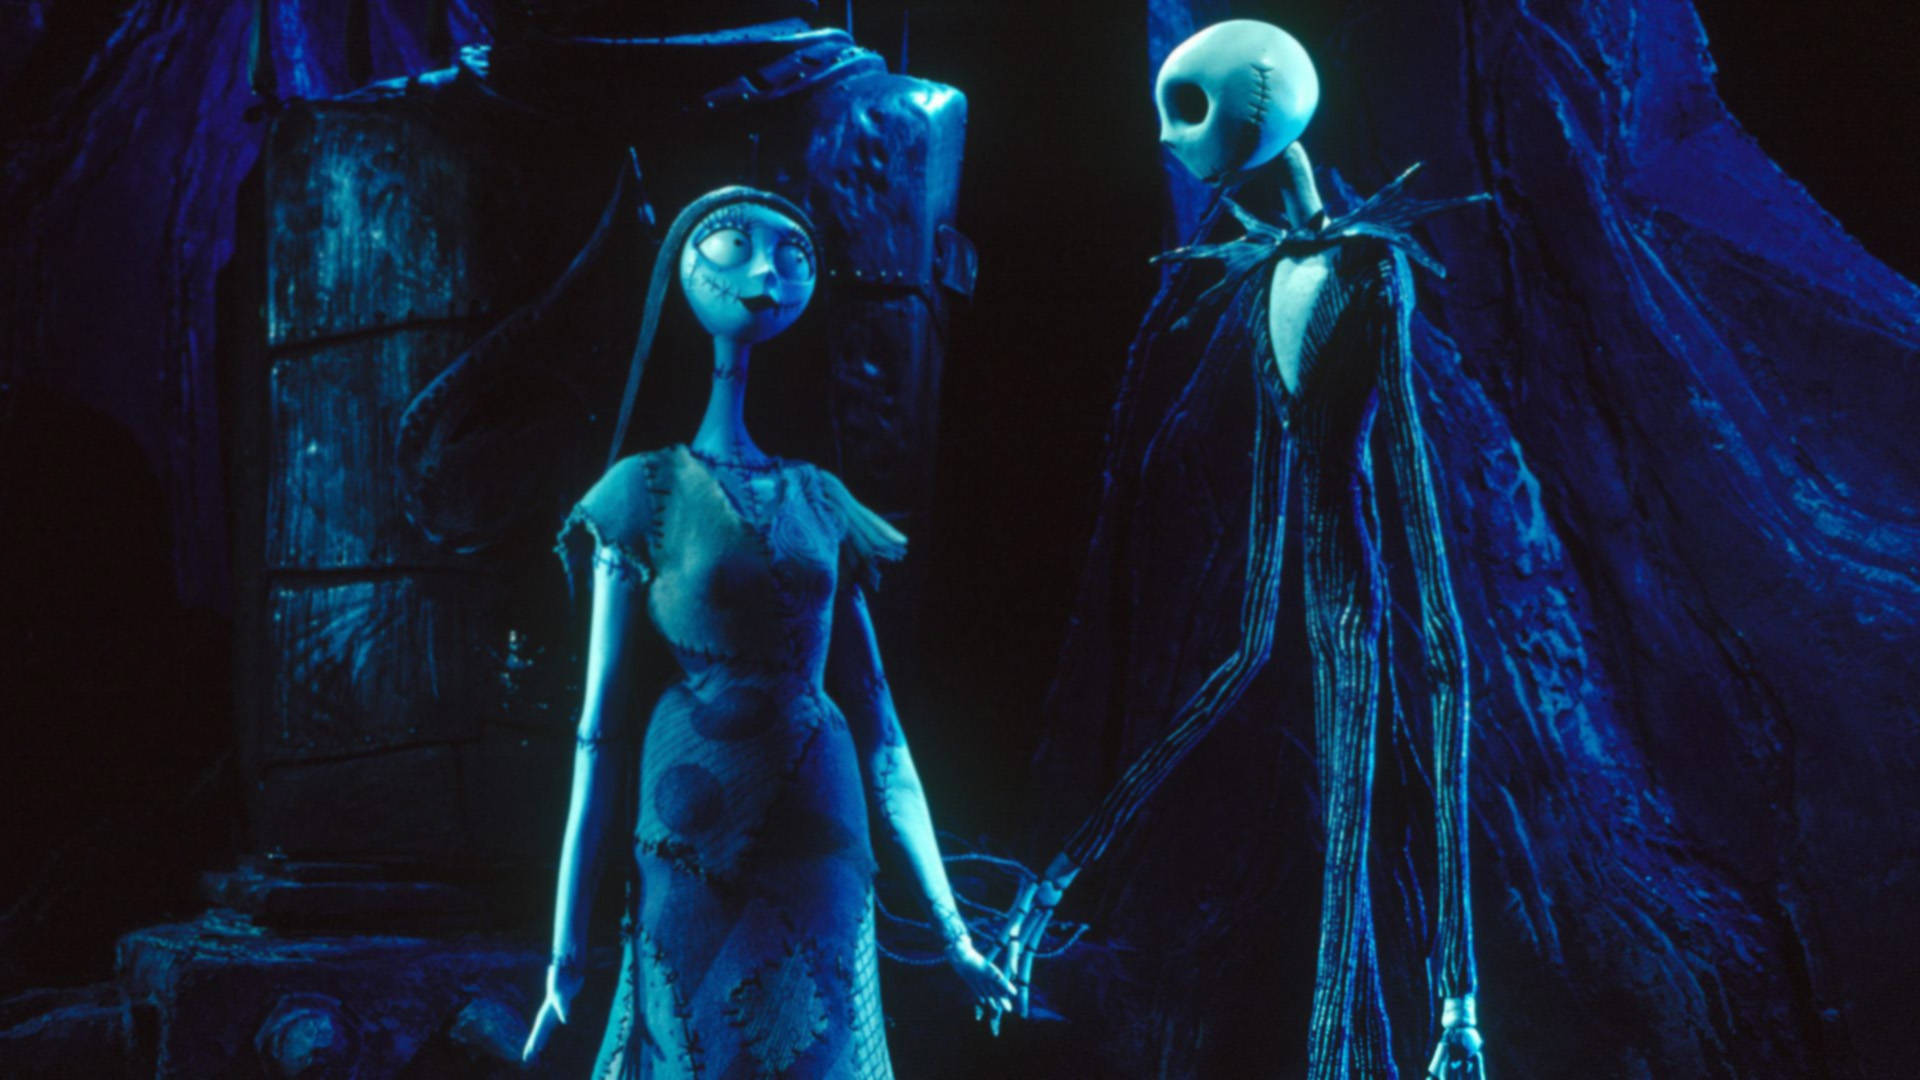 Enchanting Illustration Of Jack And Sally From Tim Burton's Masterpiece